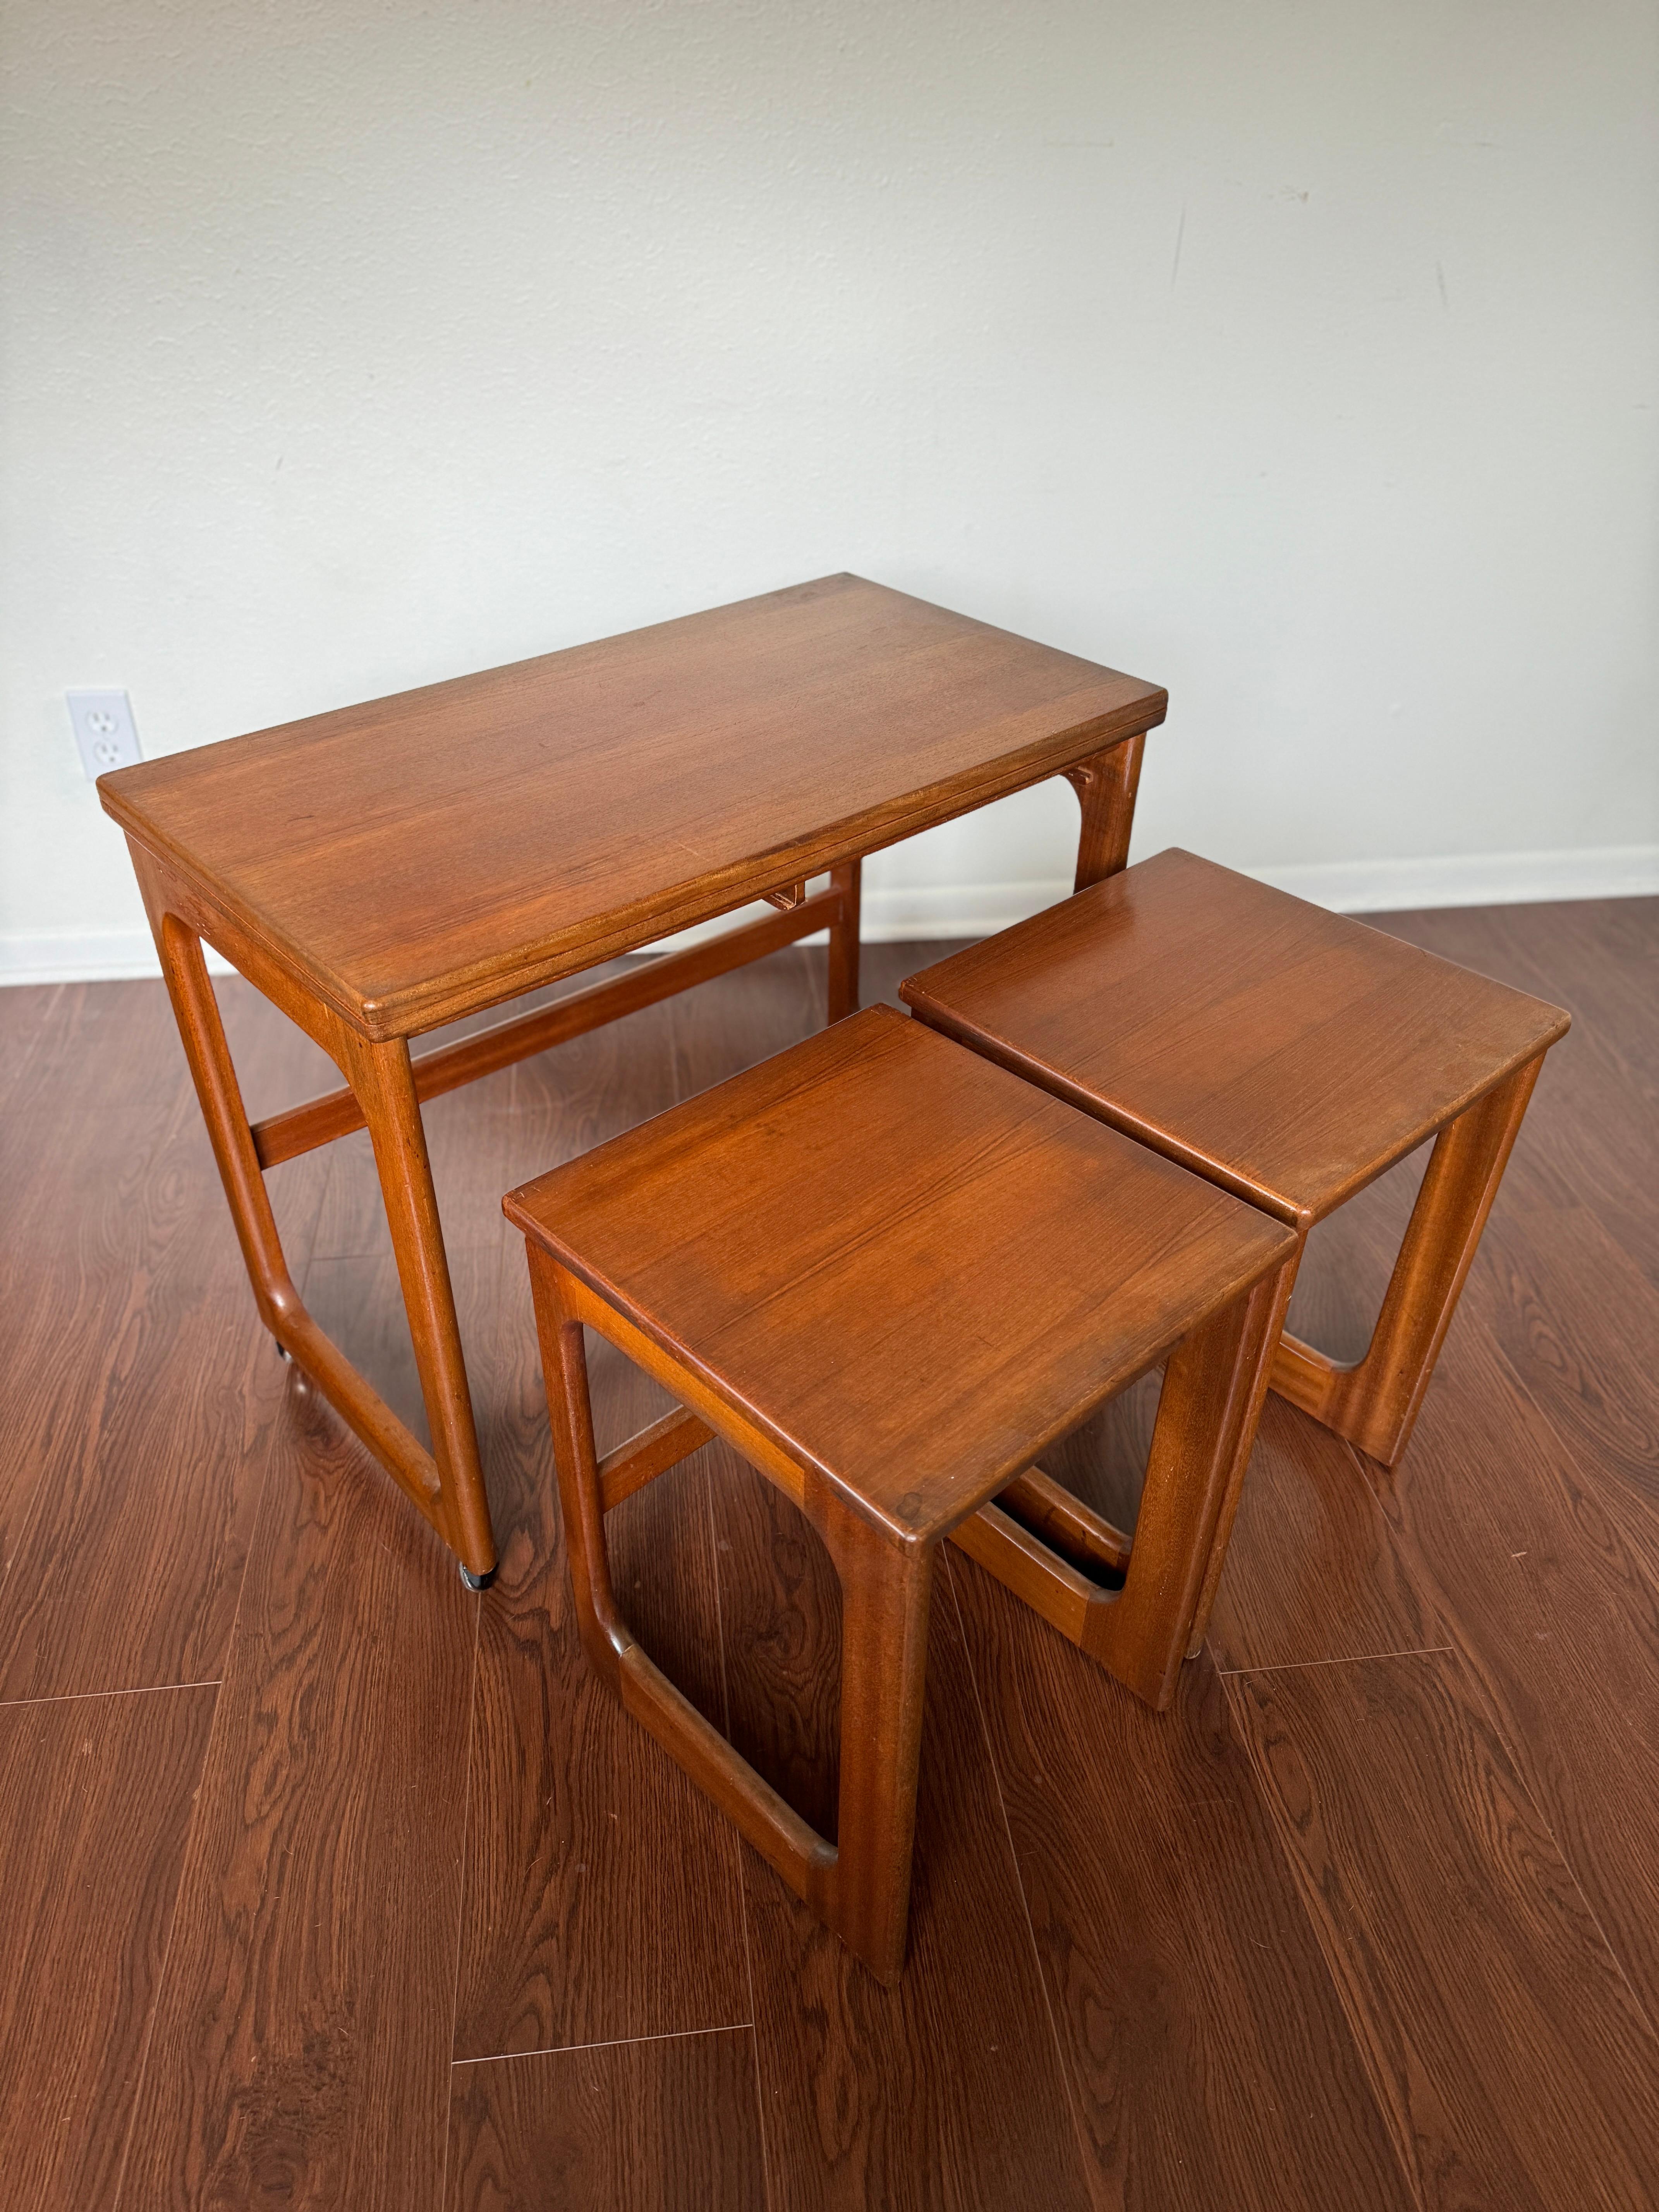 Multifunctional mid century extendable teak table by McIntosh, circa 1960s For Sale 4